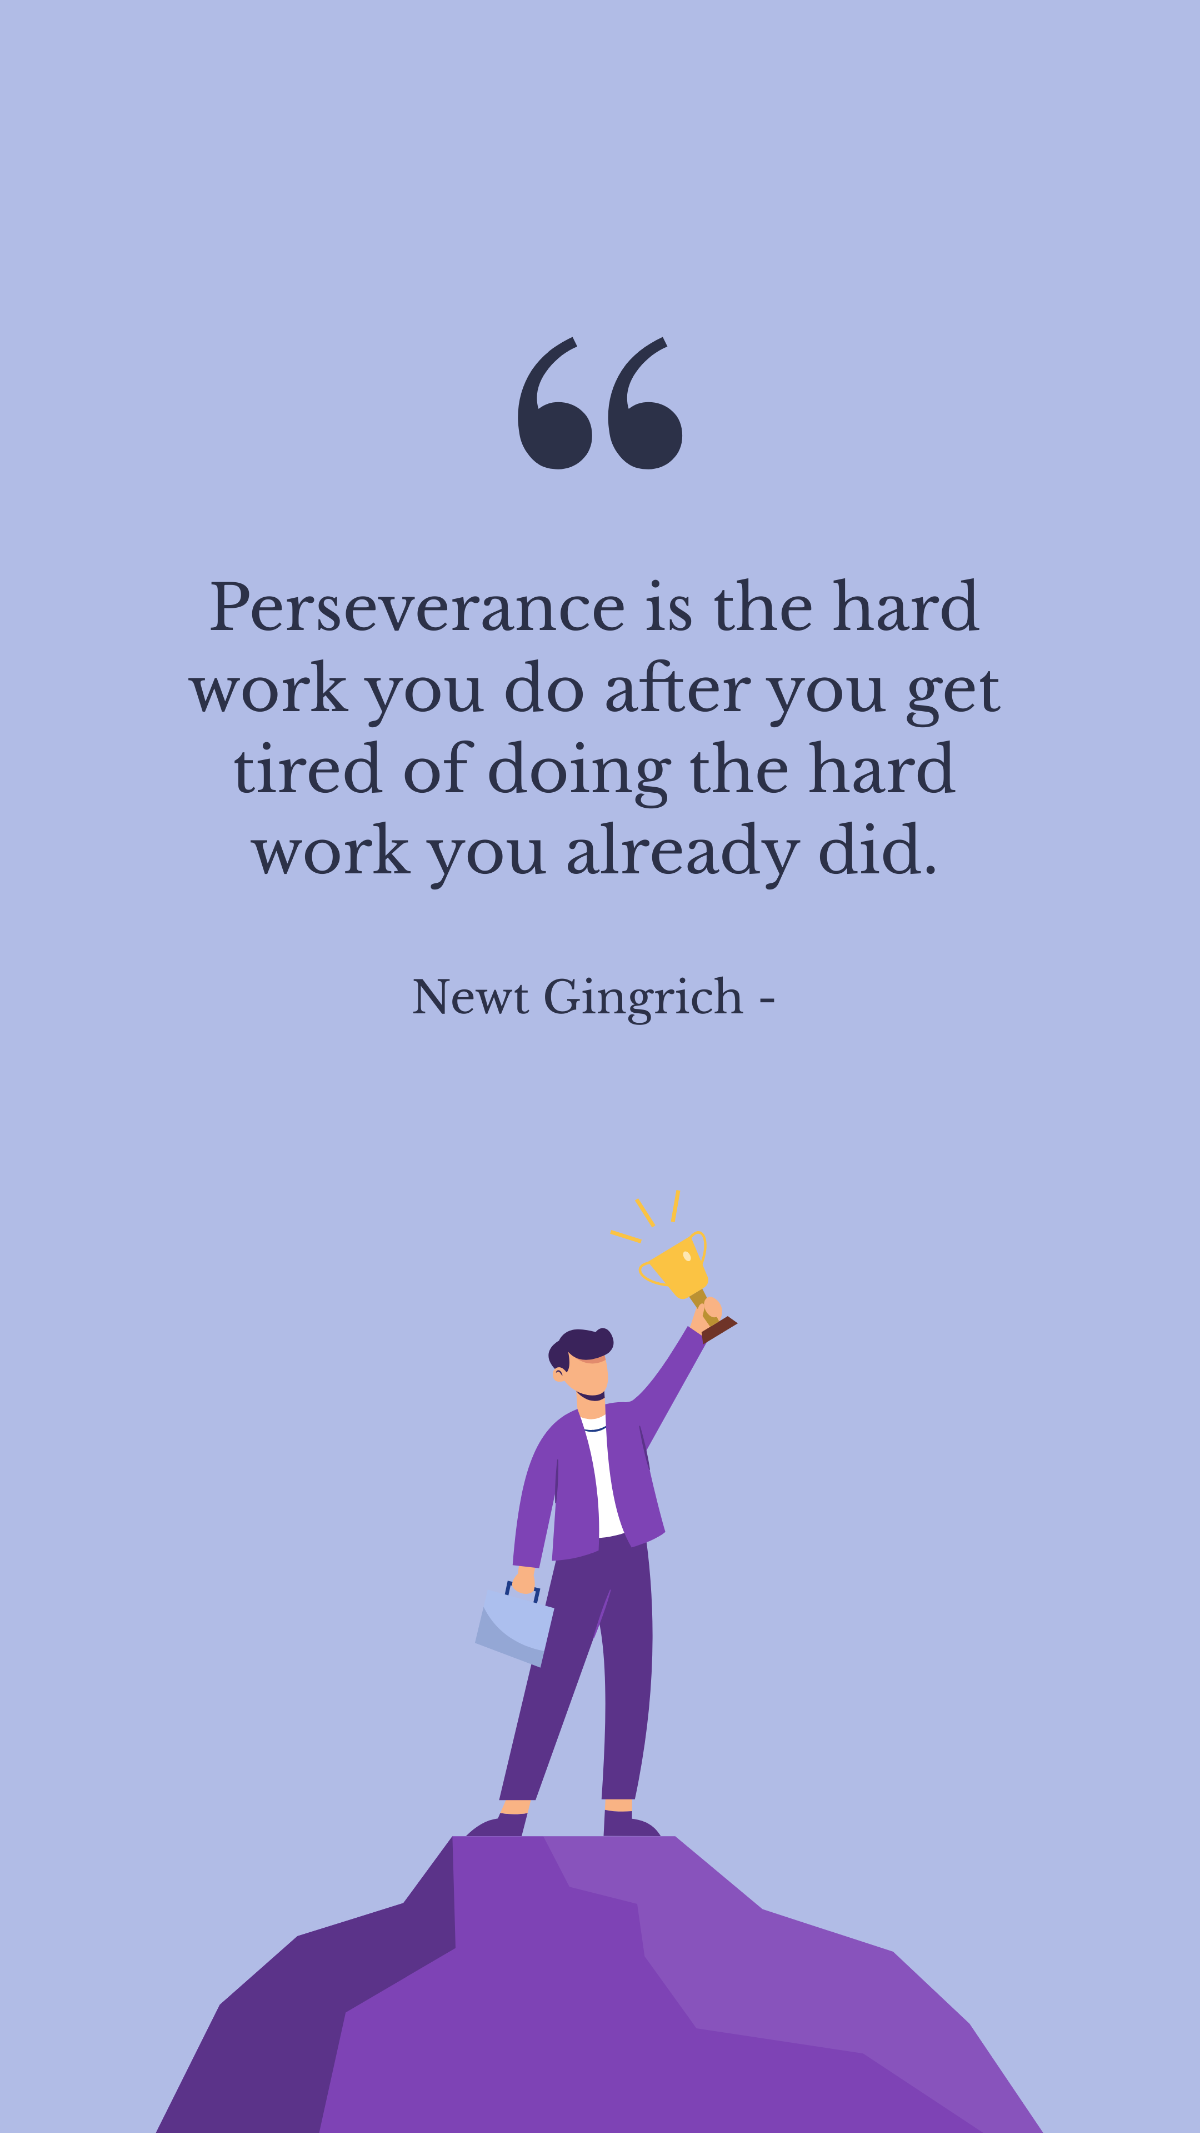 Newt Gingrich - Perseverance is the hard work you do after you get tired of doing the hard work you already did. Template